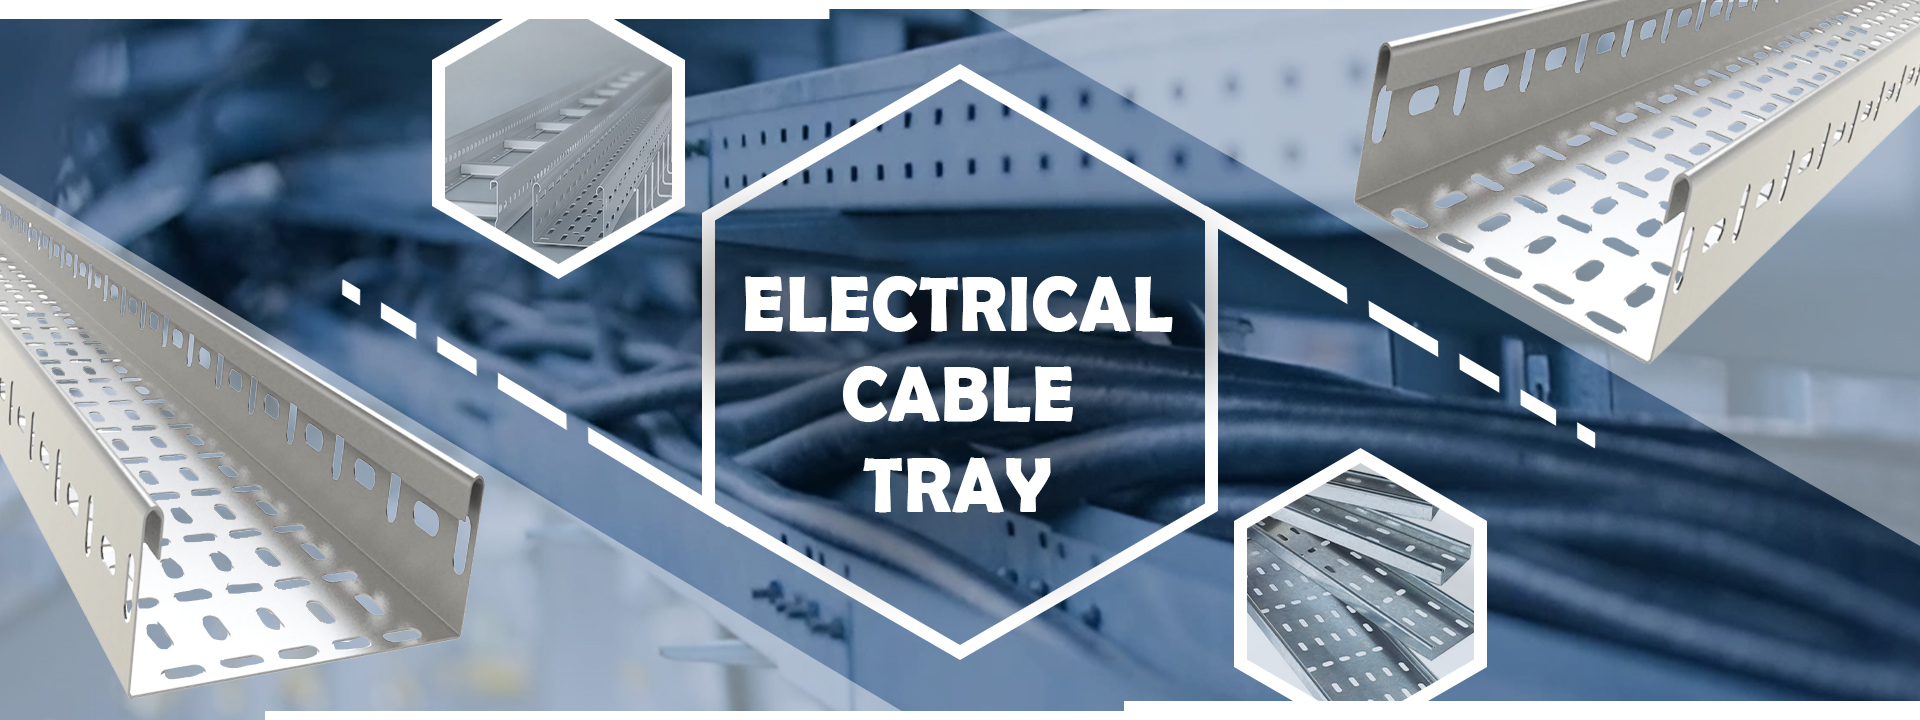 Electrical Cable Tray Manufacturers in Kolkata